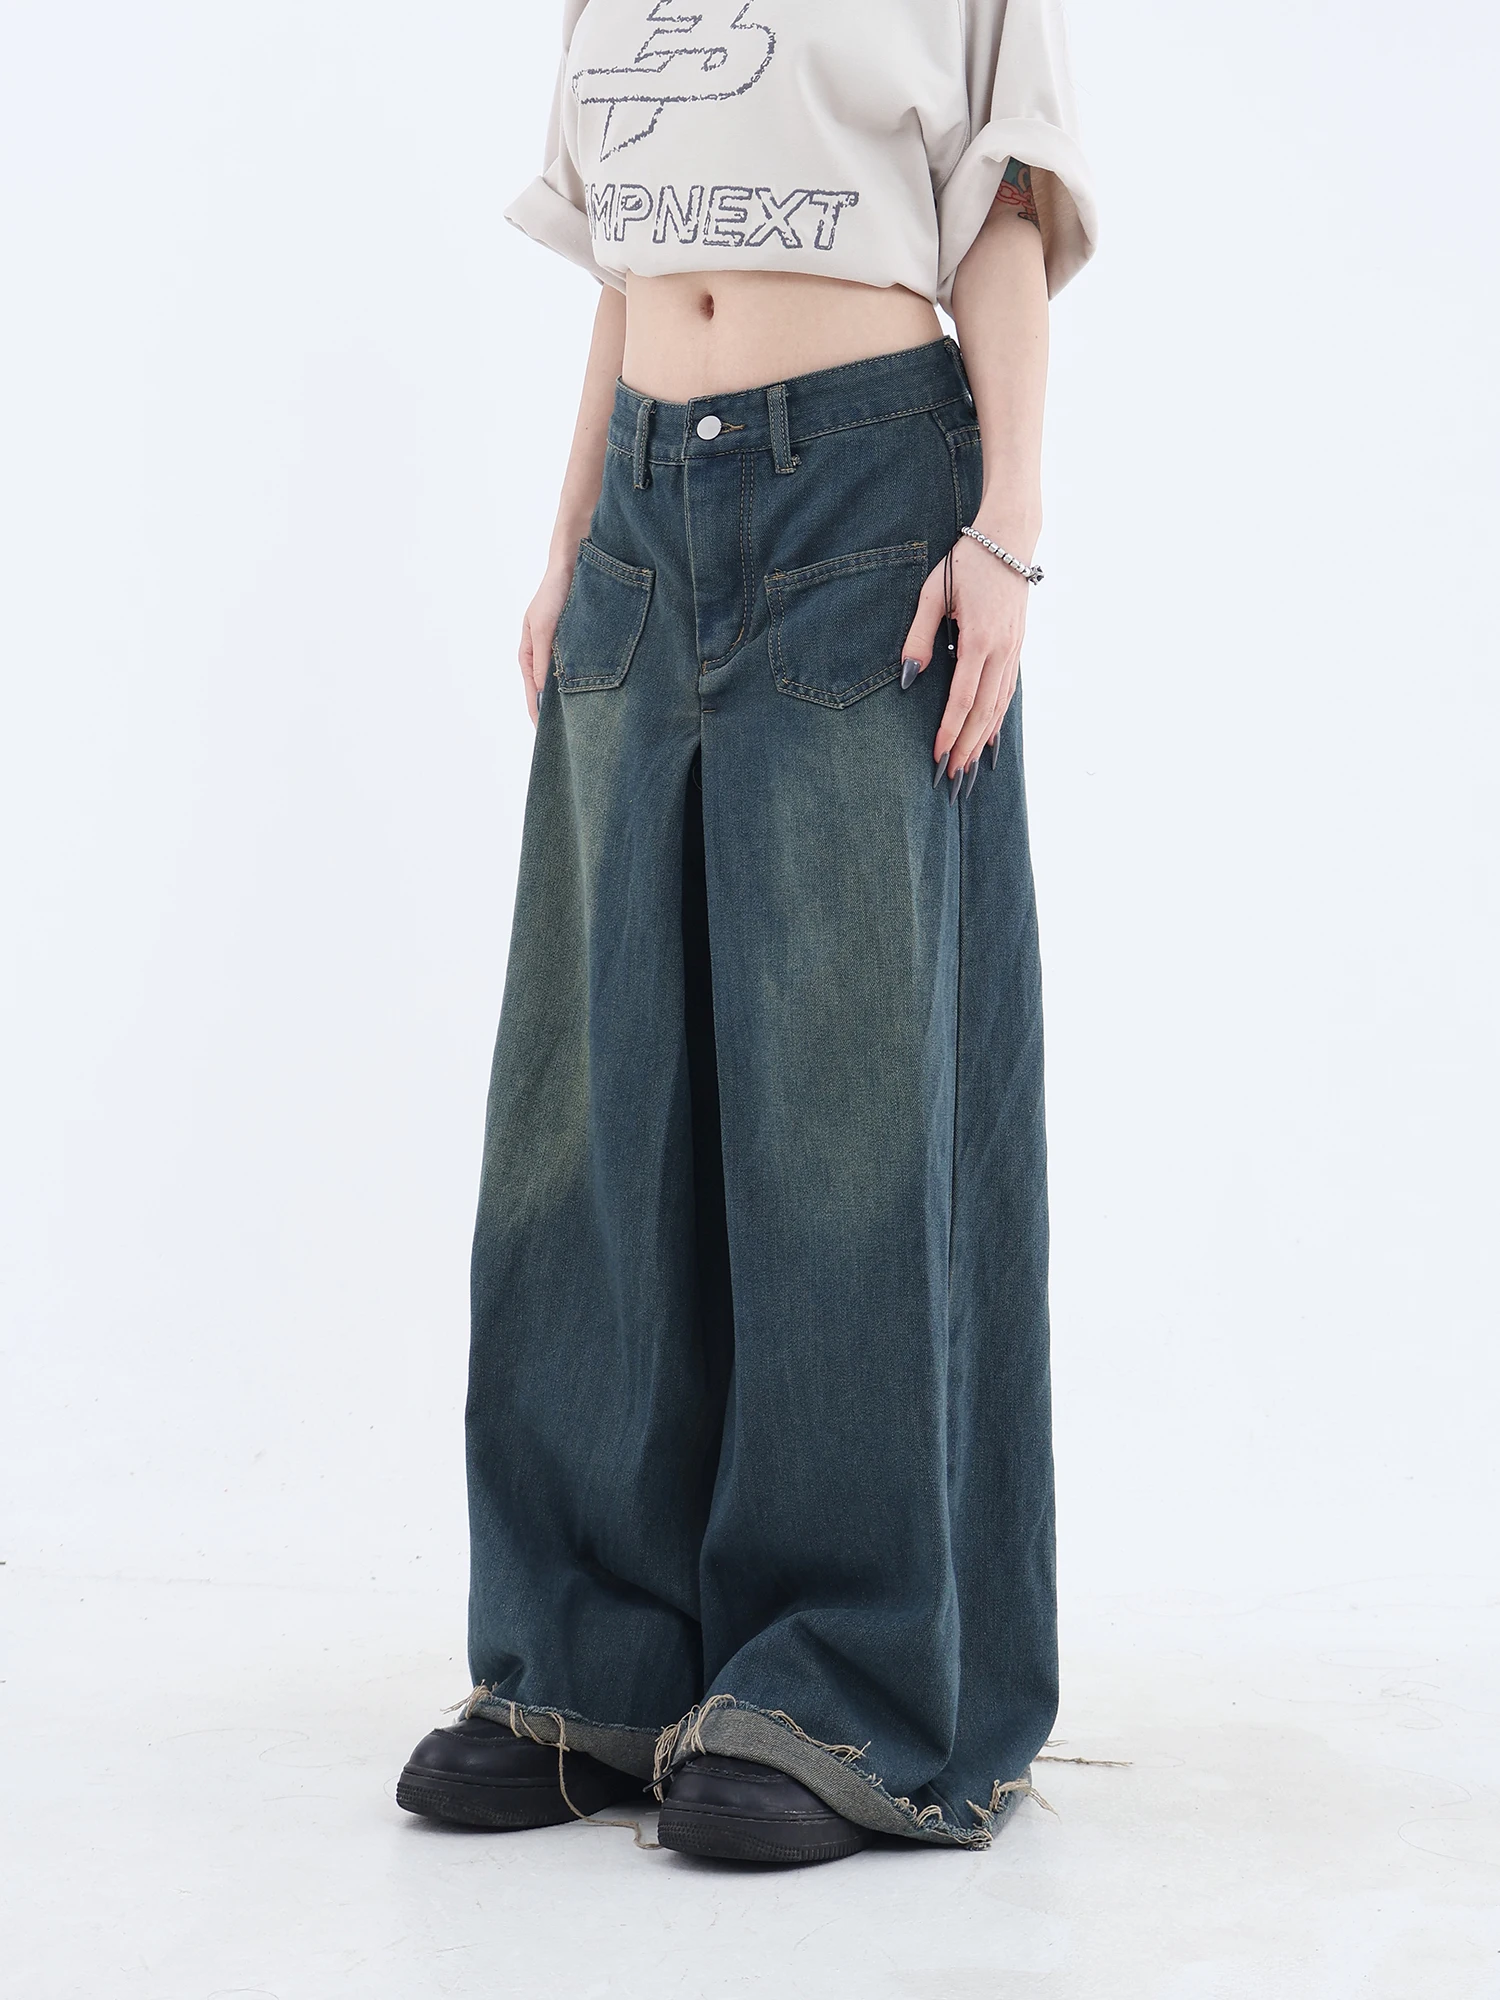 

Women's Blue Baggy Jeans Vintage Oversize Cowboy Pants Harajuku Aesthetic Denim Trousers Y2k Trashy Japanese 2000s Style Clothes